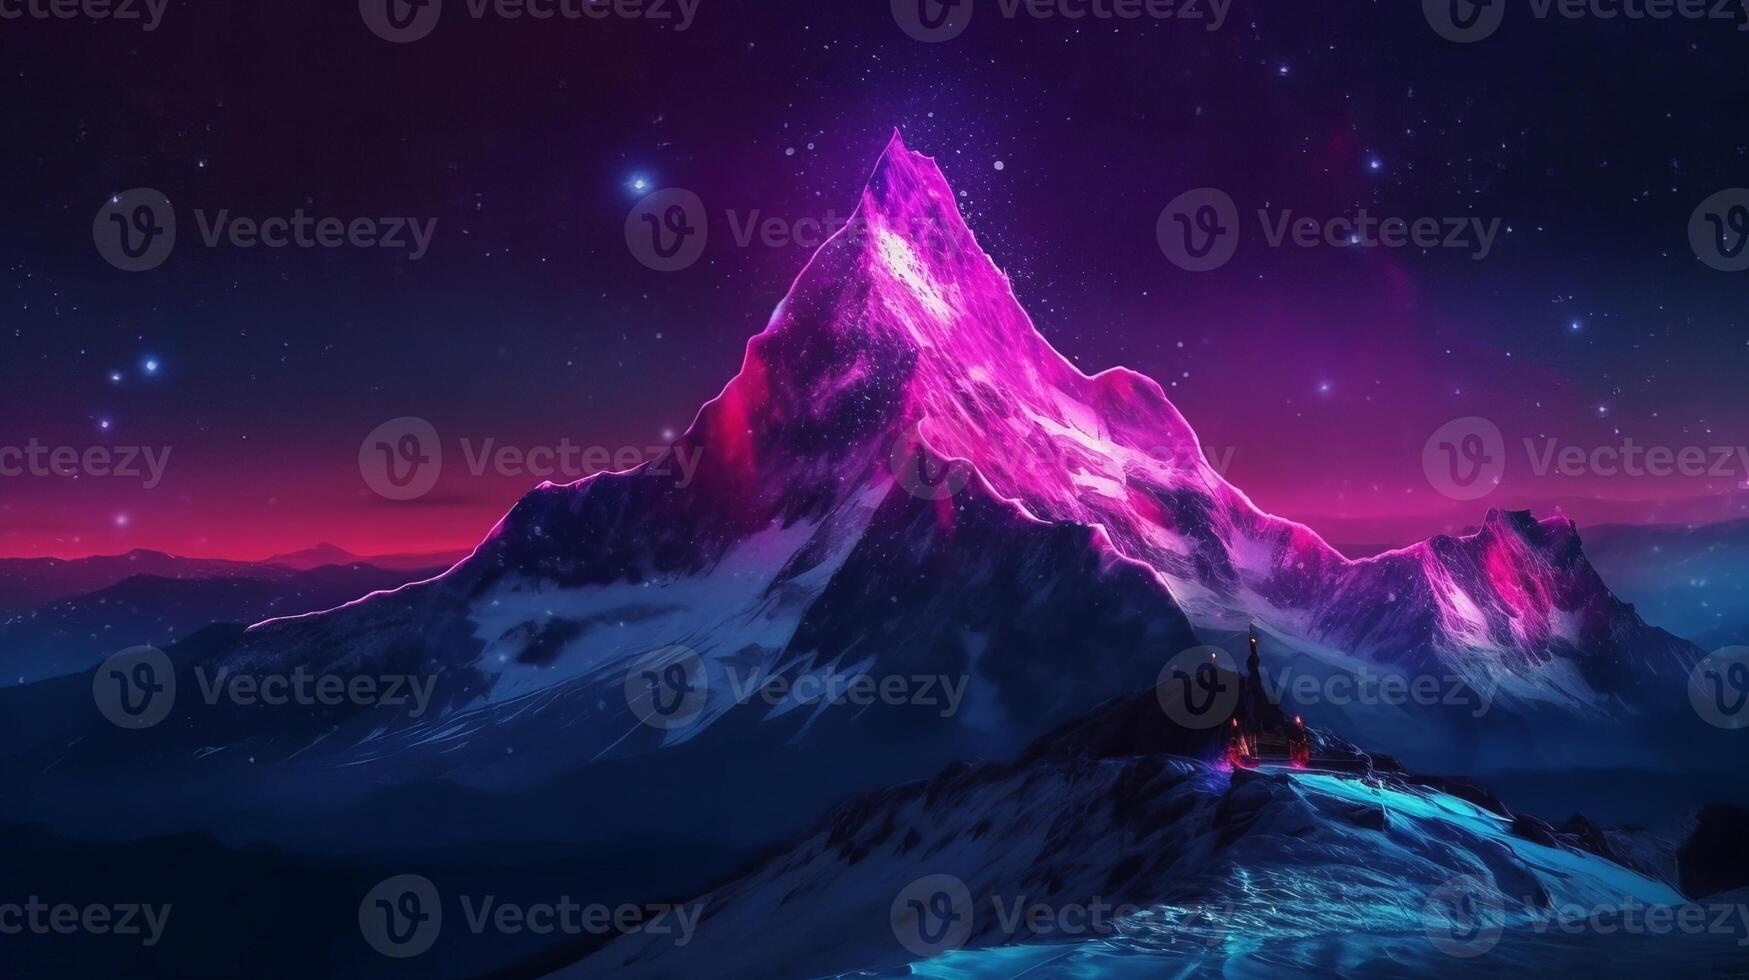 Speculative, innovative orchestrate for view, foundation and standard with pink neon triangle on crest of cold mountain at night with starry blue purple sky. Creative resource, photo